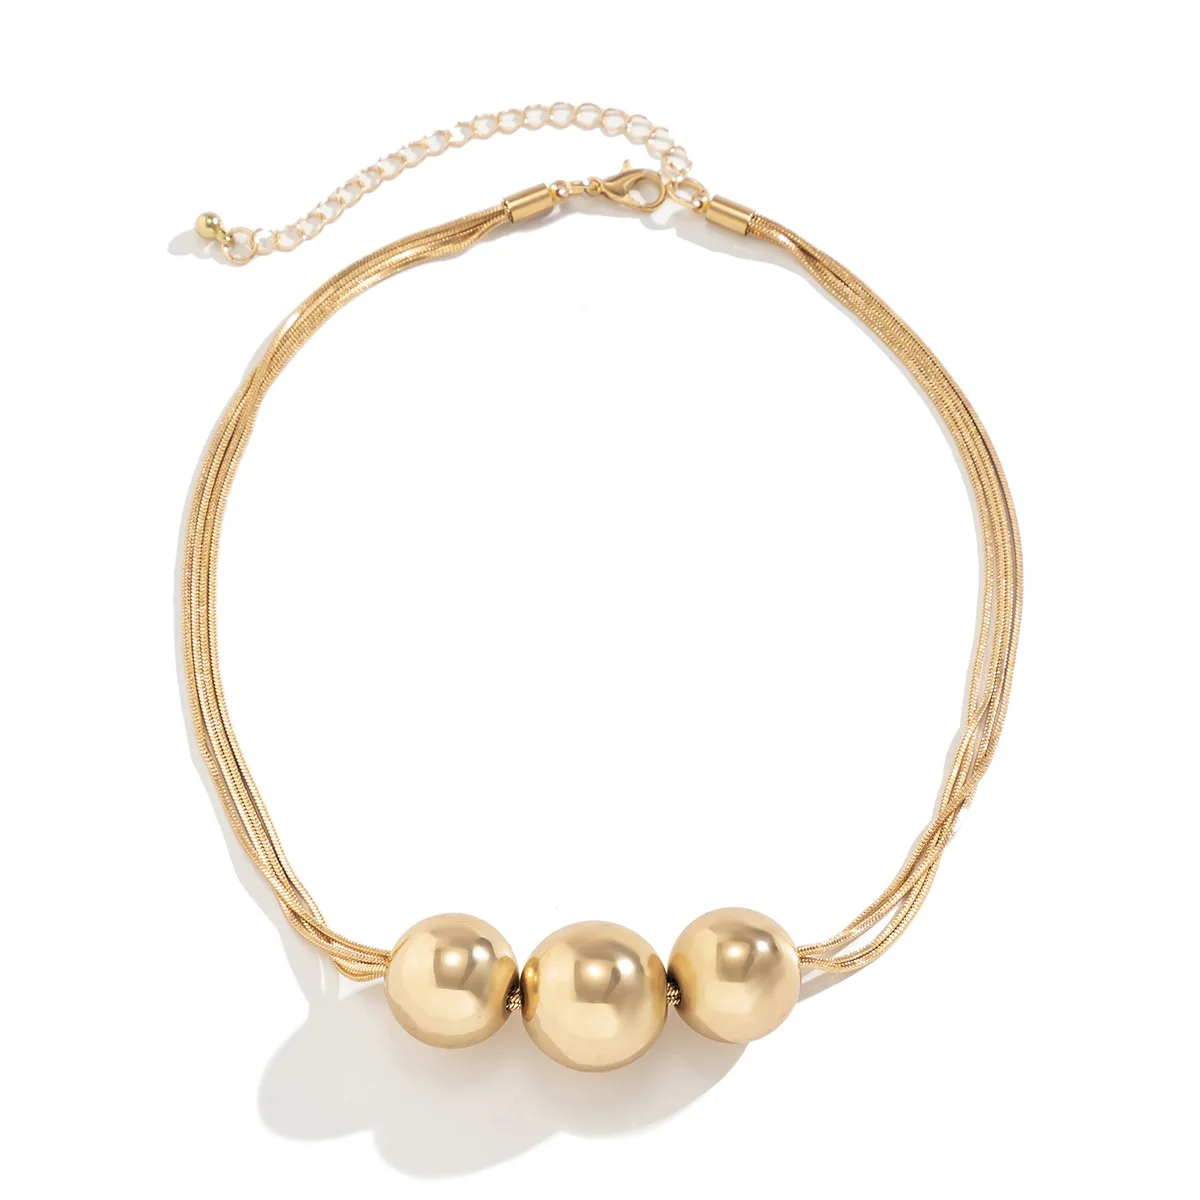 

Exaggerated Big Beads Gold Large Circle Ball Pendant Choker Necklace for Women Metal Necklace Collar